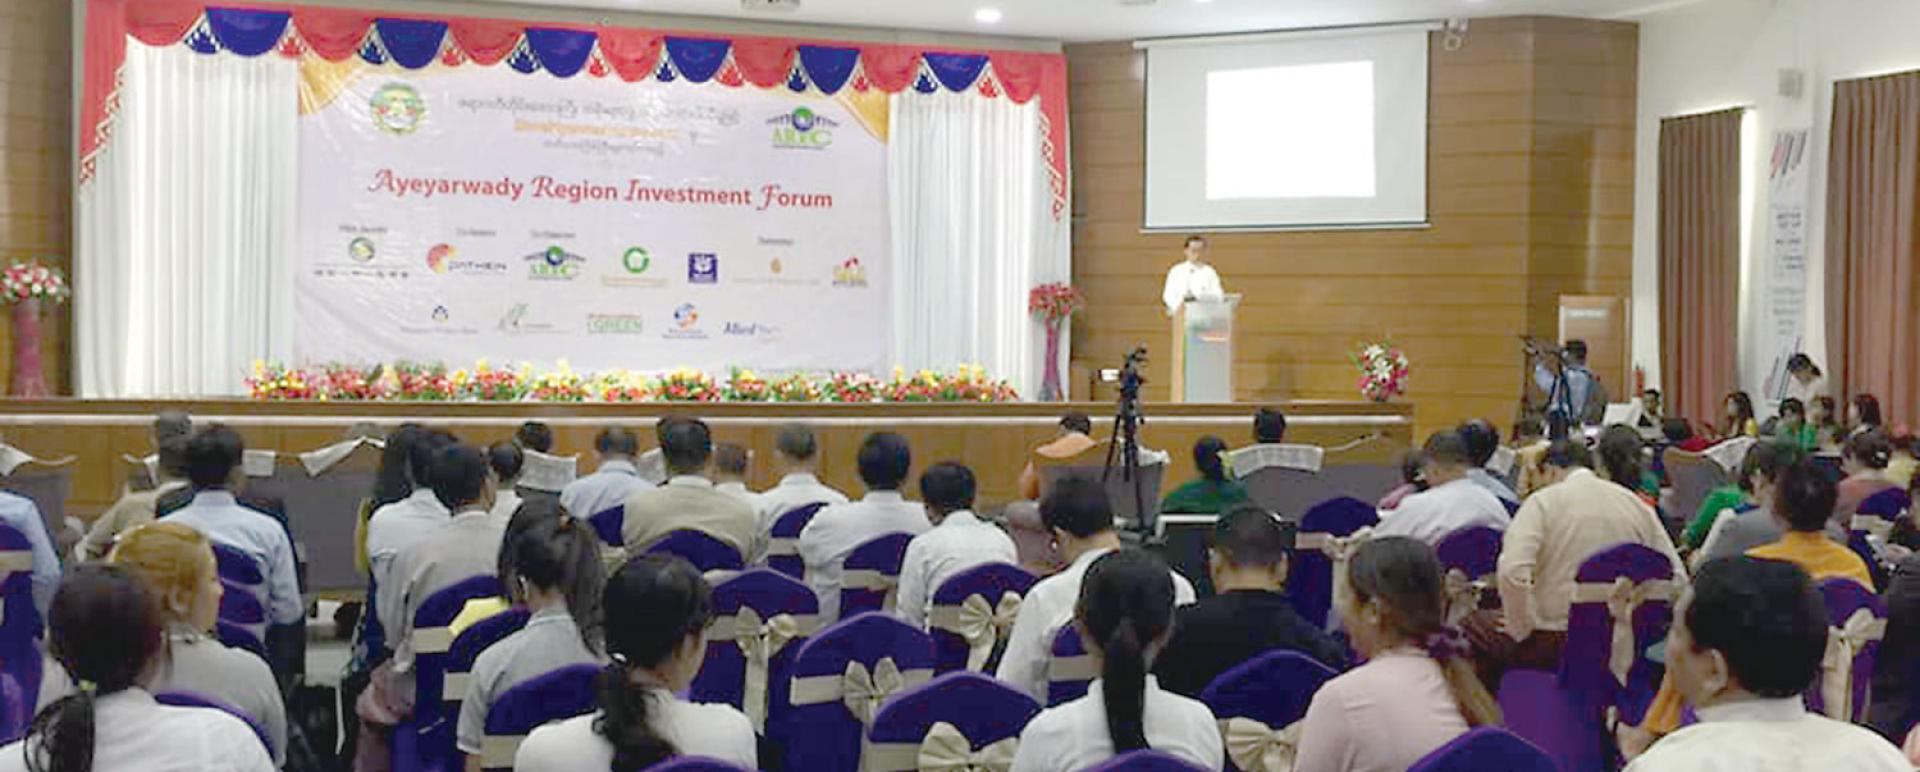 Ayeyarwady Region Investment Forum held in Ngwe Saung Beach with aiming to boom regional economic development and basic infrastructures in Ayeyawady Region 